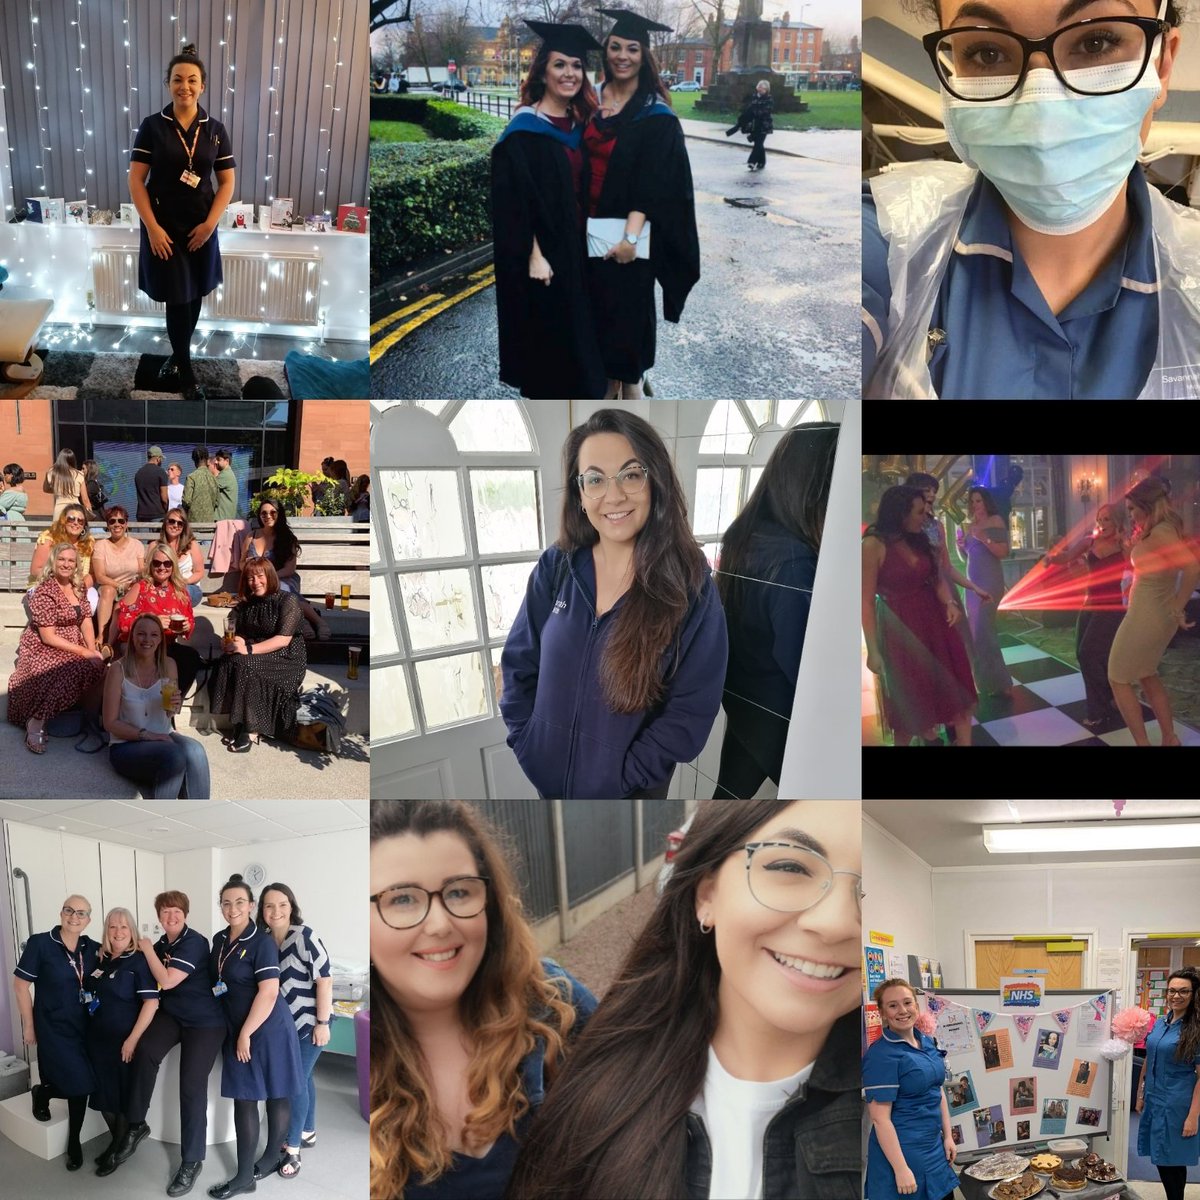 The most wonderful people I know 💜 happy international day of the midwife to all my incredible colleagues! Your commitment, compassion and general loveliness inspires me every day #IDM23  #IfNotYouThenWho
youtu.be/igdihf5TSGw